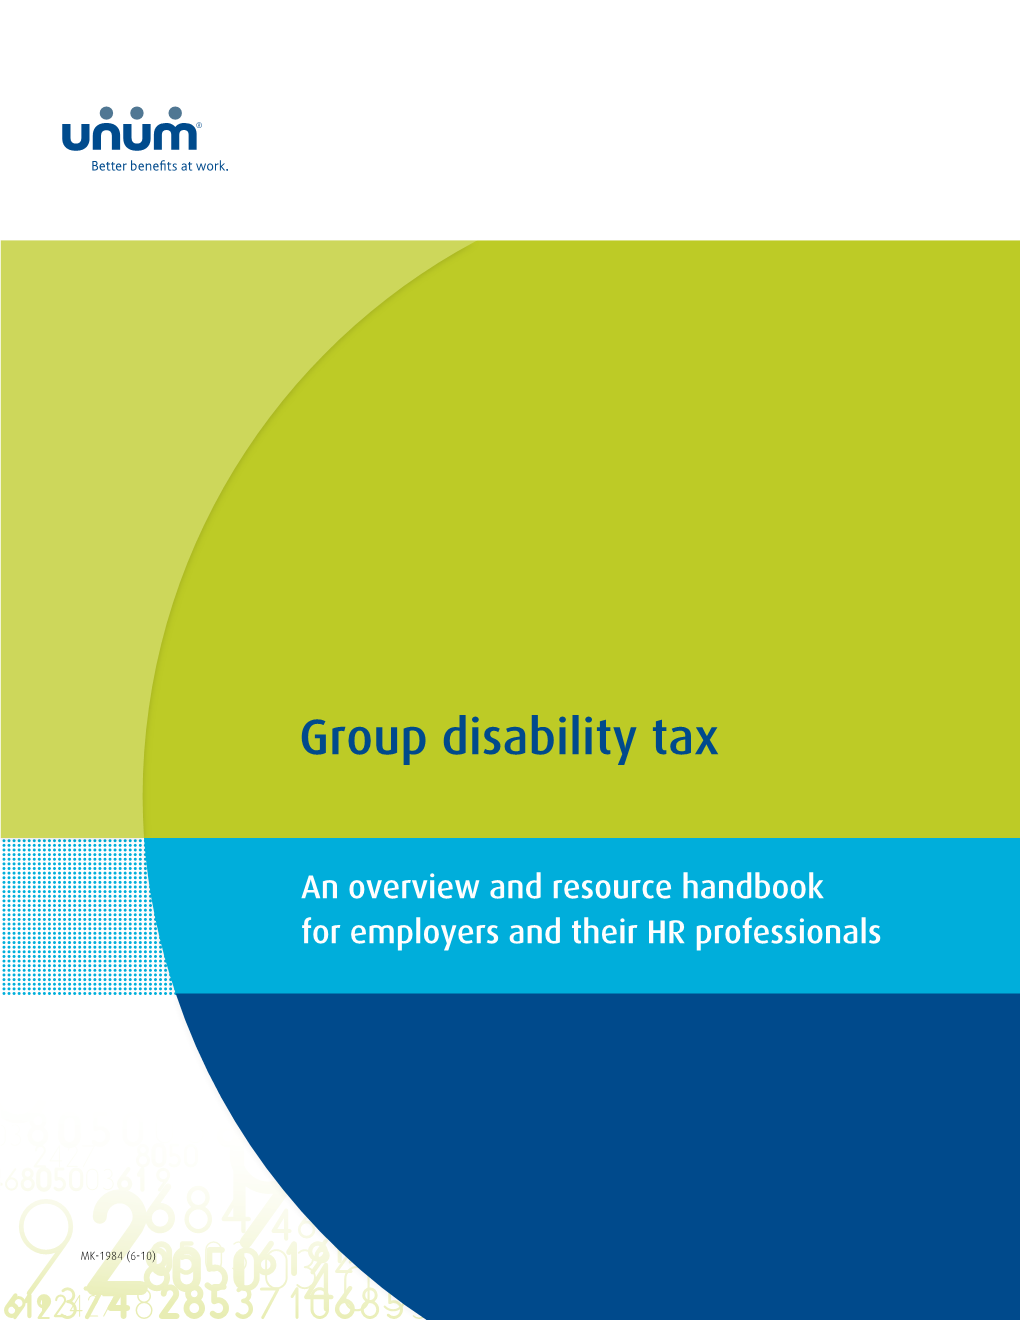 Group Disability Tax